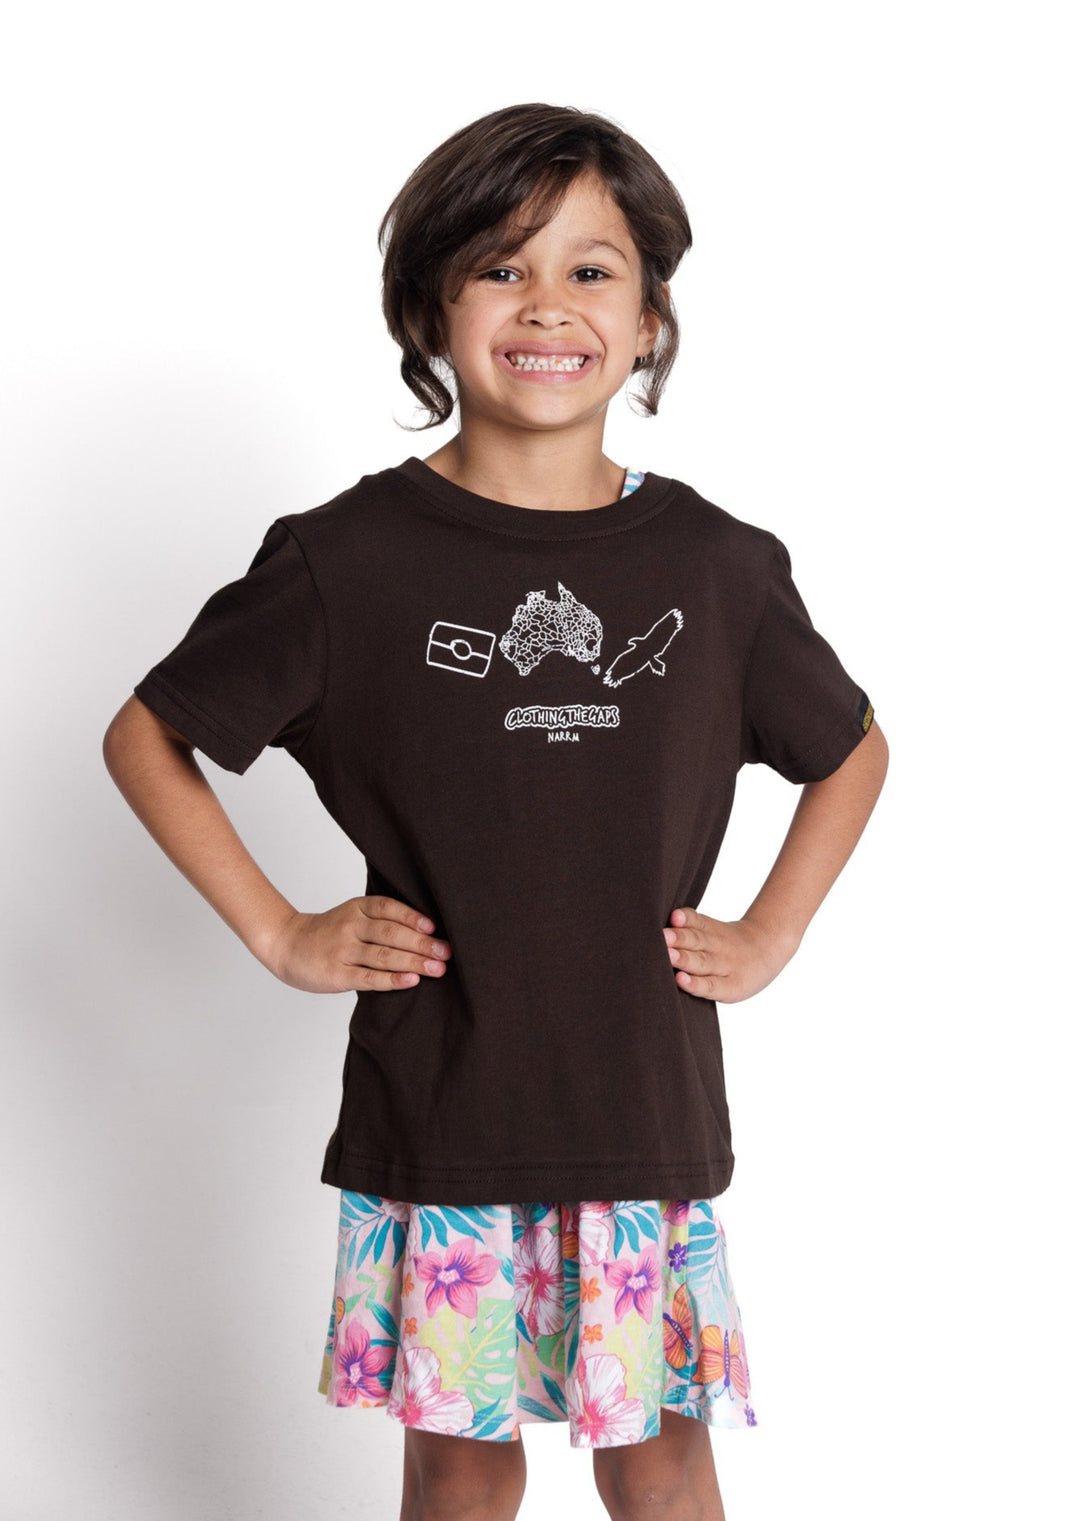 Clothing The Gaps. Kids Icon Tee. Expresso dark brown tee featuring Aboriginal symbols of resistance and culture including a white outline of the Aboriginal flag, a white outlined decolonised map of “Australia” and a white outlined Bunjil, a well known wedge-tailed eagle - who is the spiritual creator and protector of the Kulin Nation in Victoria. These symbols are on the front of the tee across the chest.